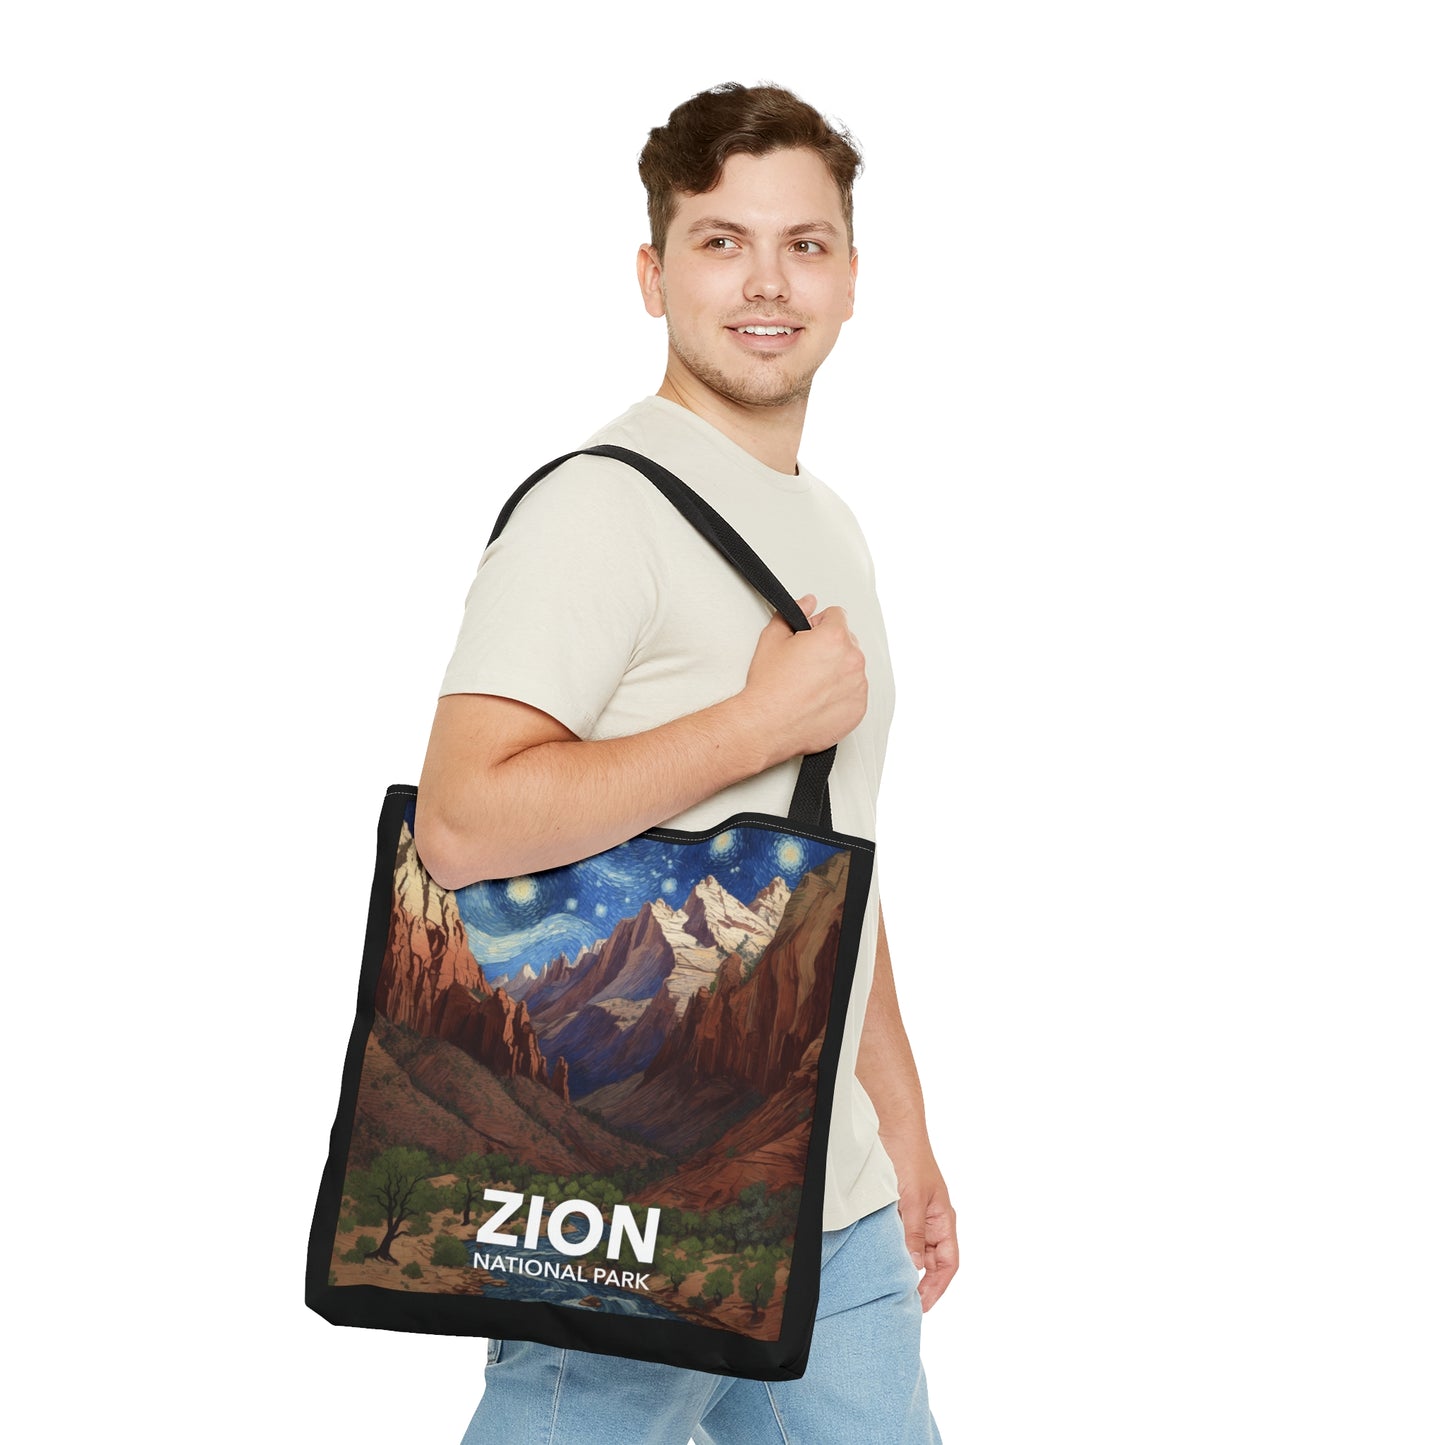 Zion National Park Tote Bag - The Starry Night